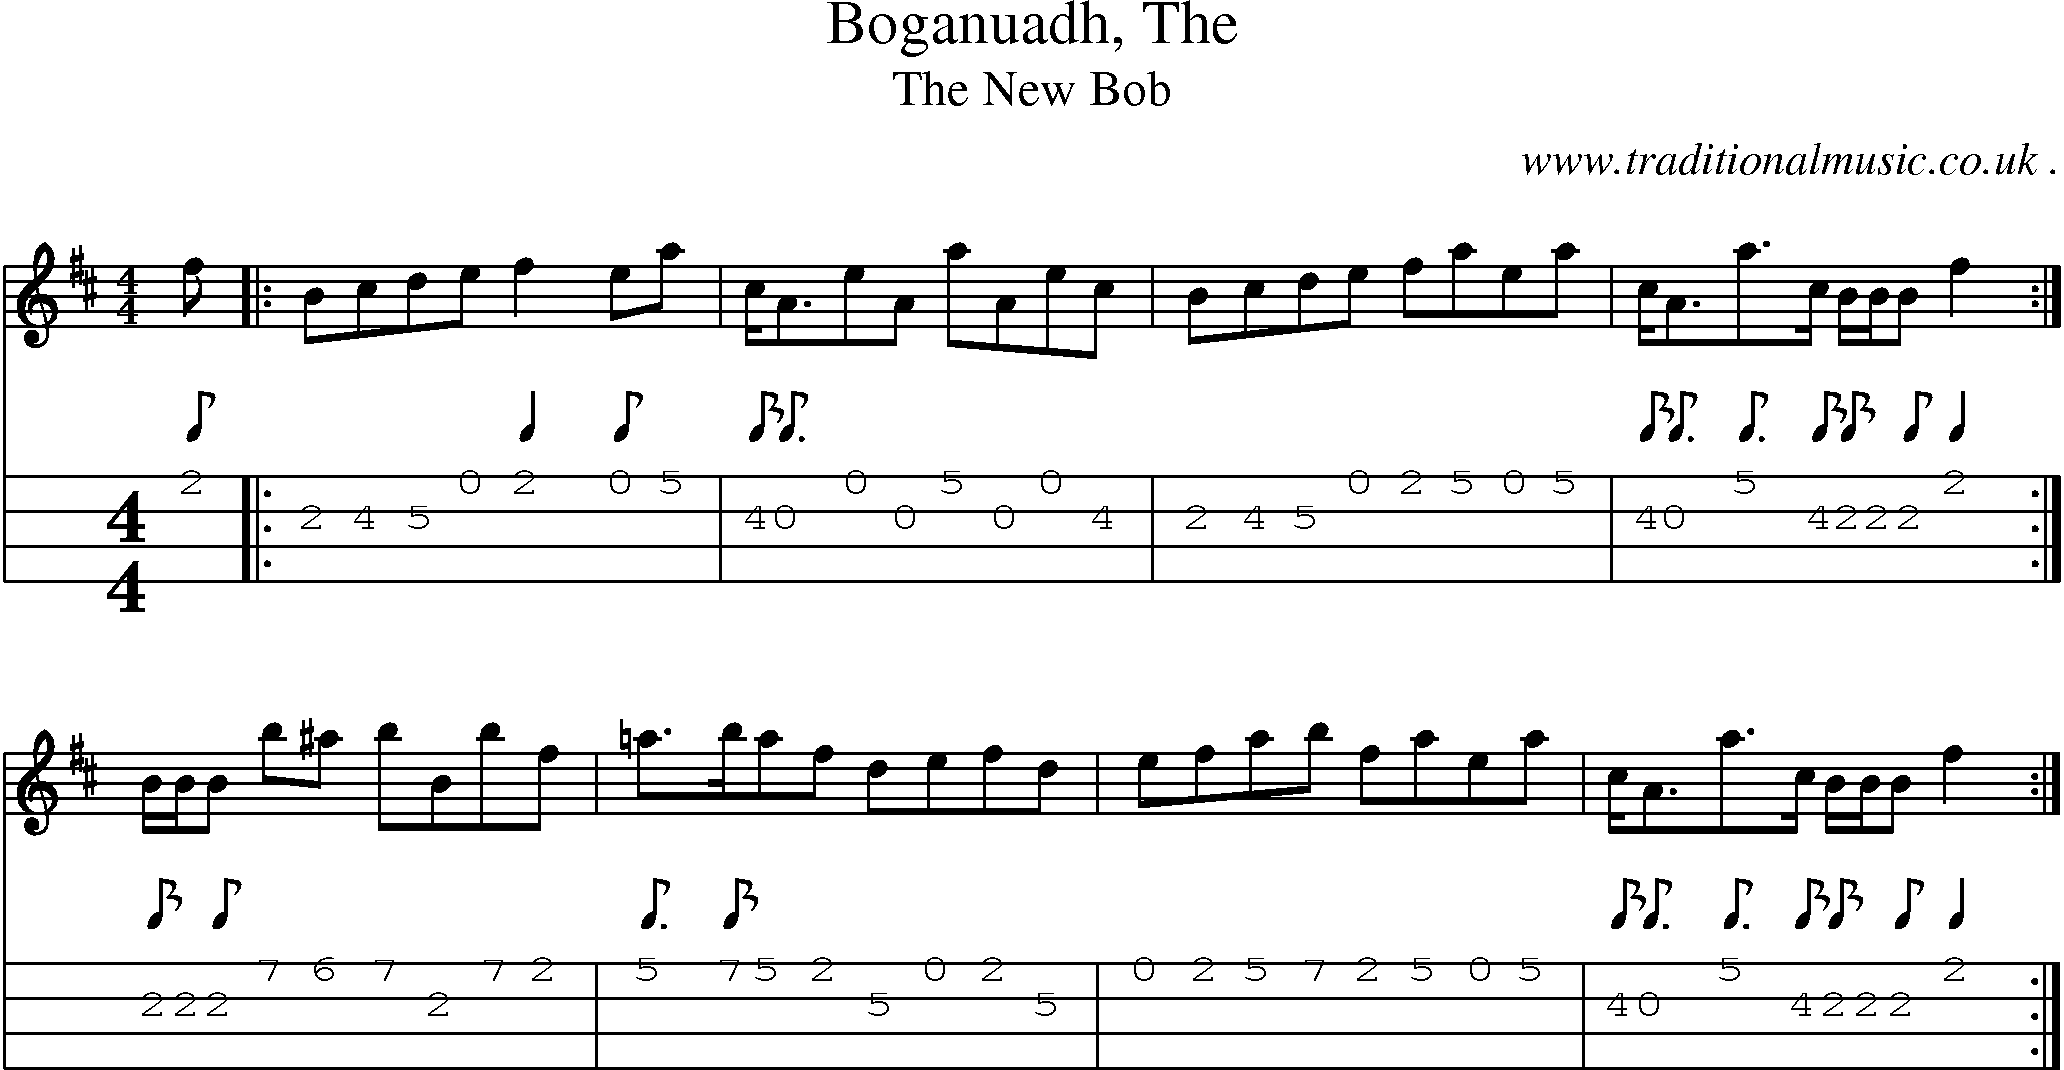 Sheet-music  score, Chords and Mandolin Tabs for Boganuadh The